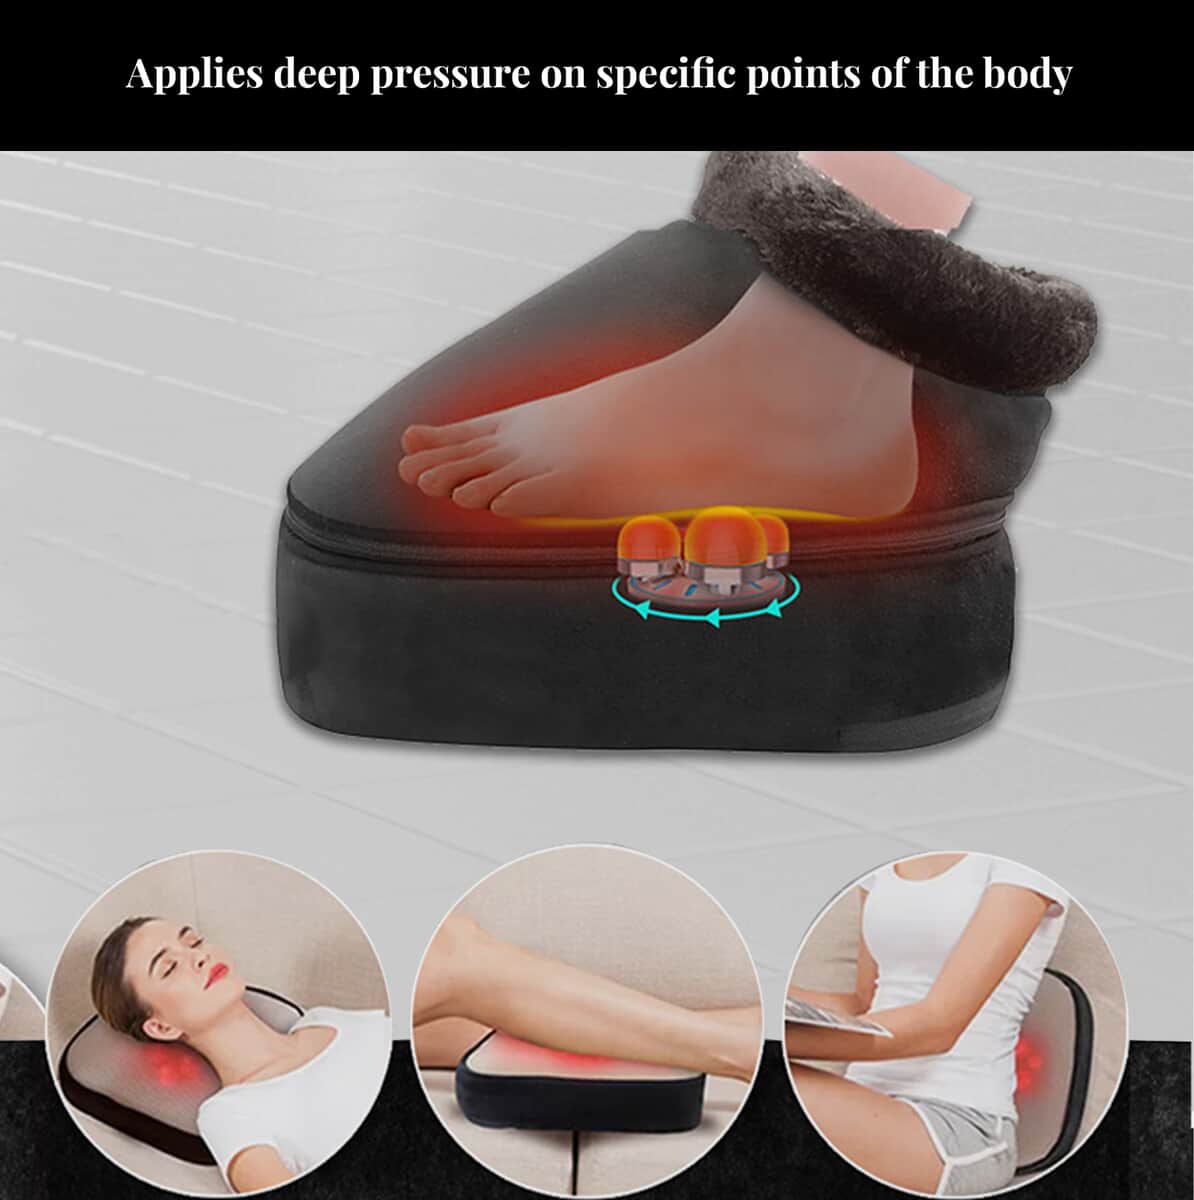 Black 3 in 1 Foot Massager Spa (11.81"x7.50"x7.50") image number 3